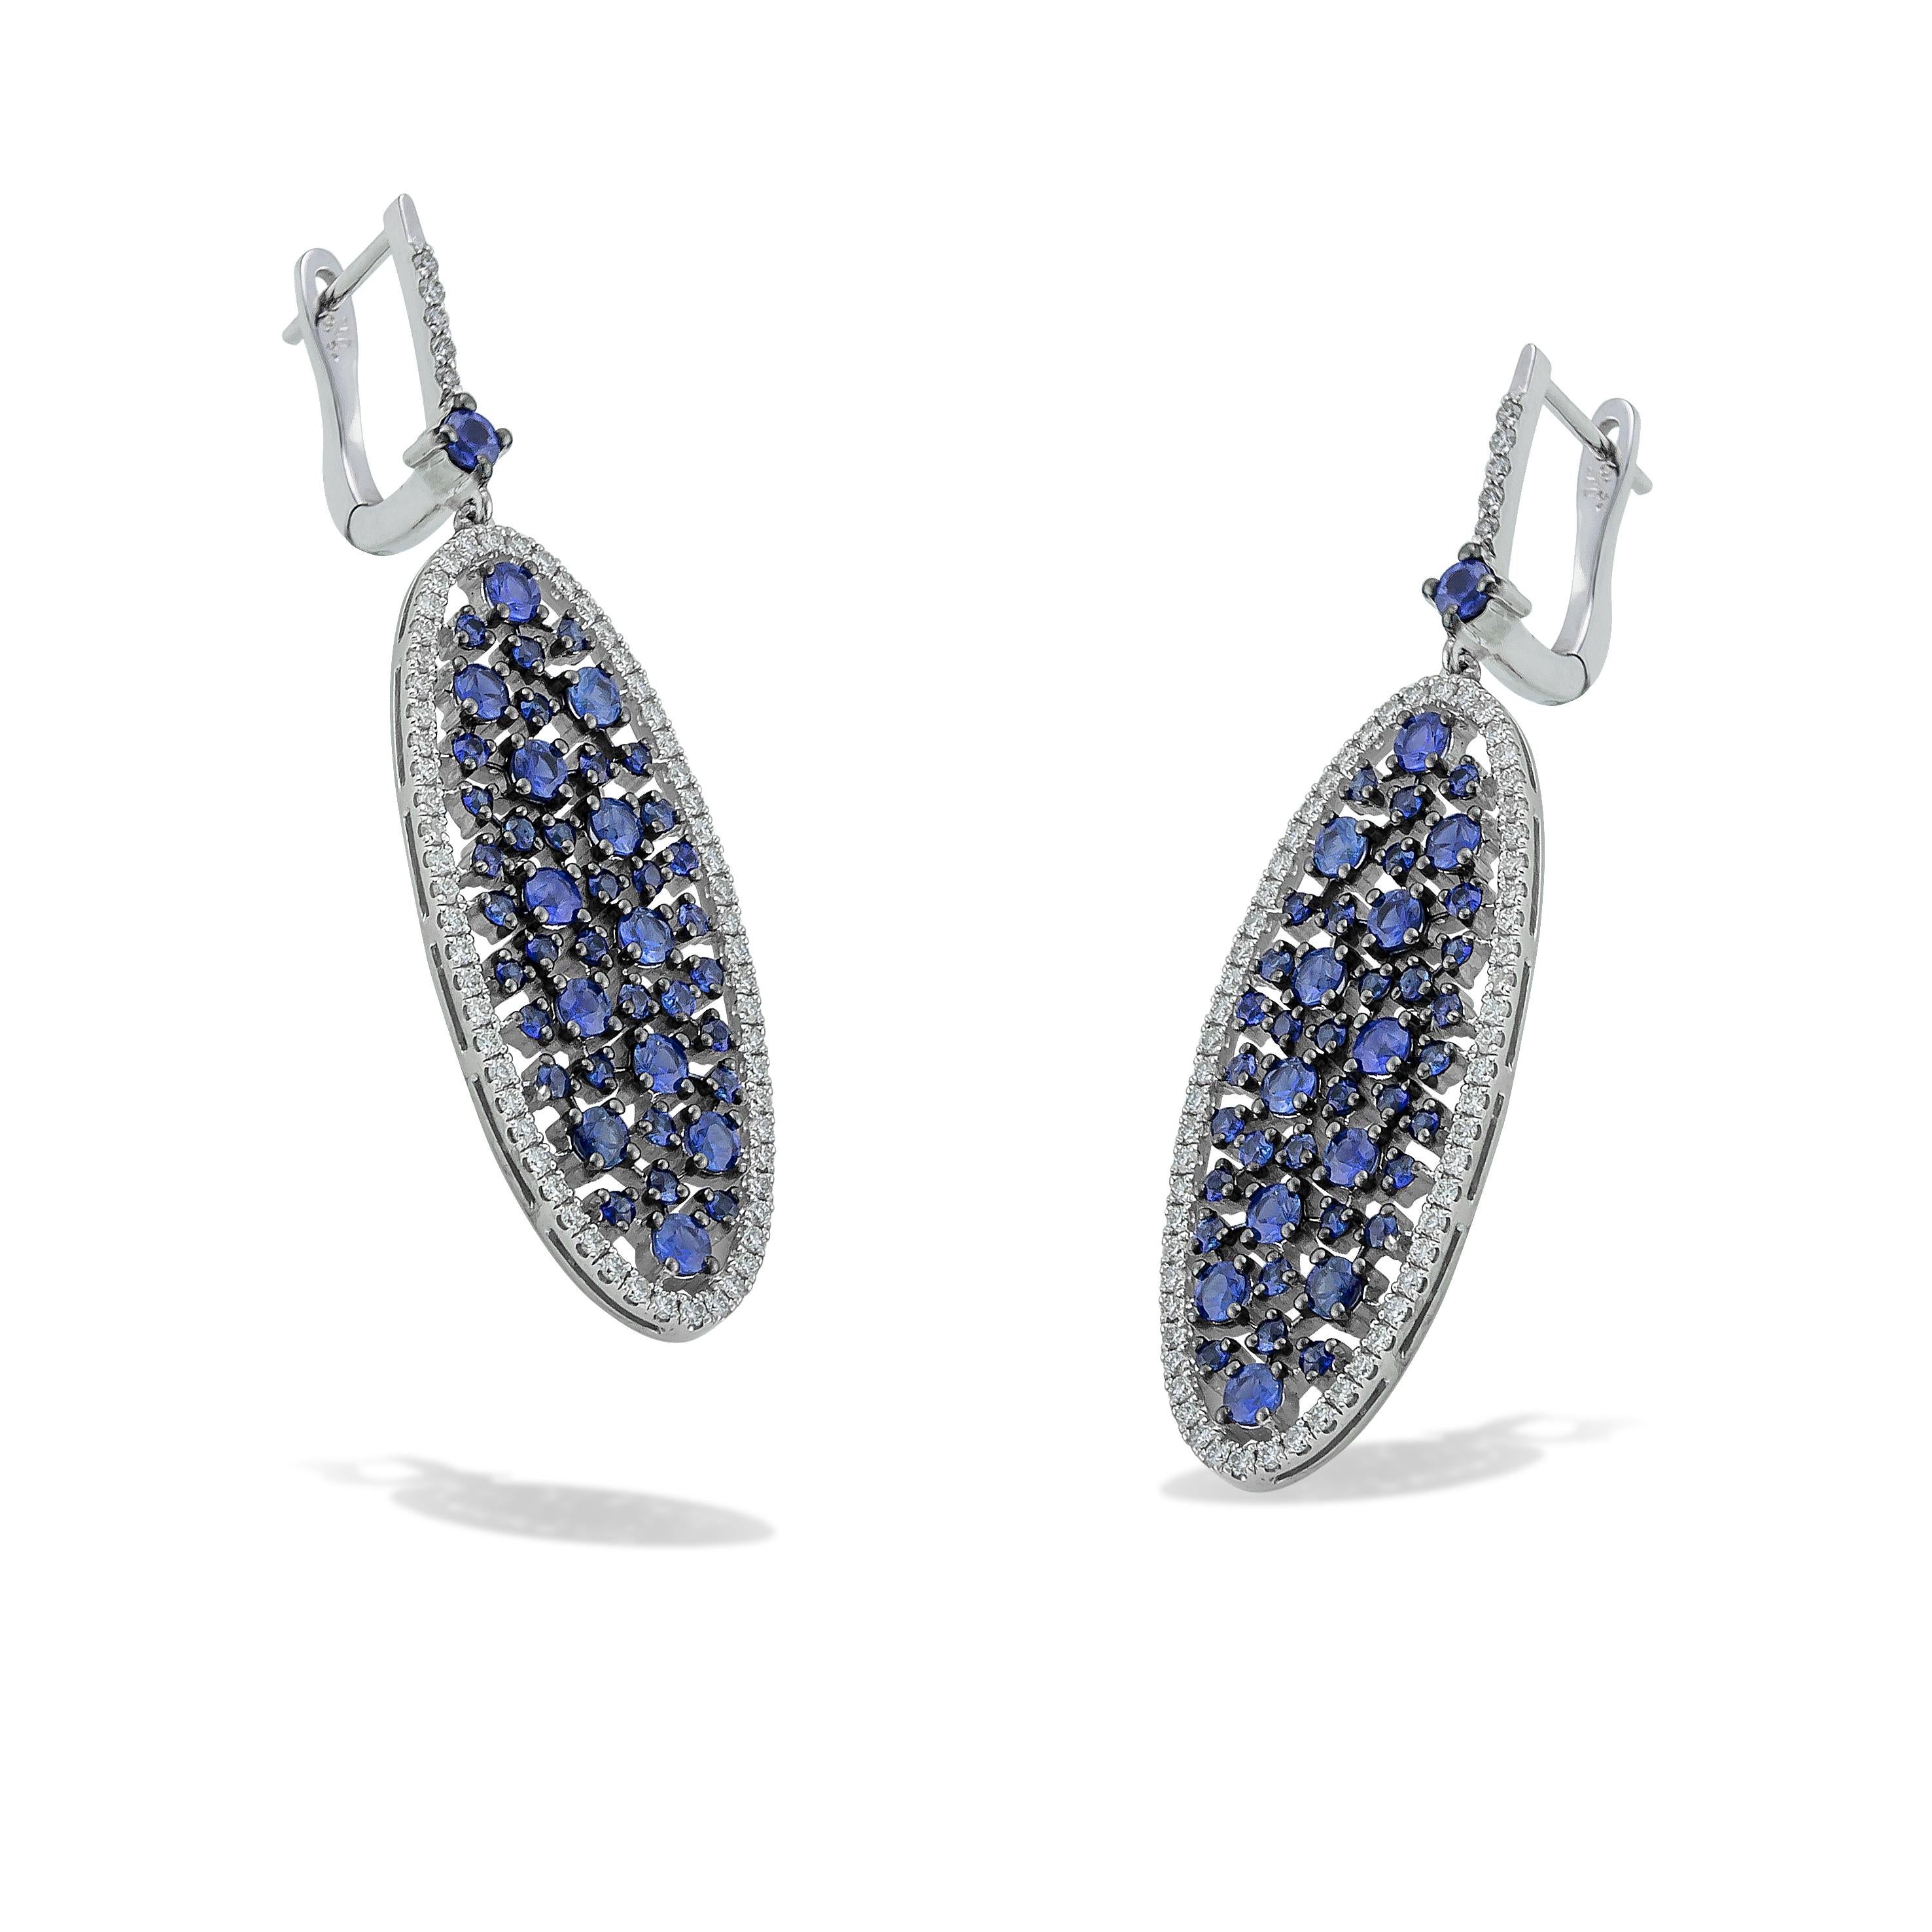 Oval long dangle earrings with round Blue Sapphires and pave white brilliant cut diamonds handcrafted in 18Kt white gold. This breathtaking piar of earrings speaks volumes as it glimmers with natural brilliance. The Blue Sapphires captures the power